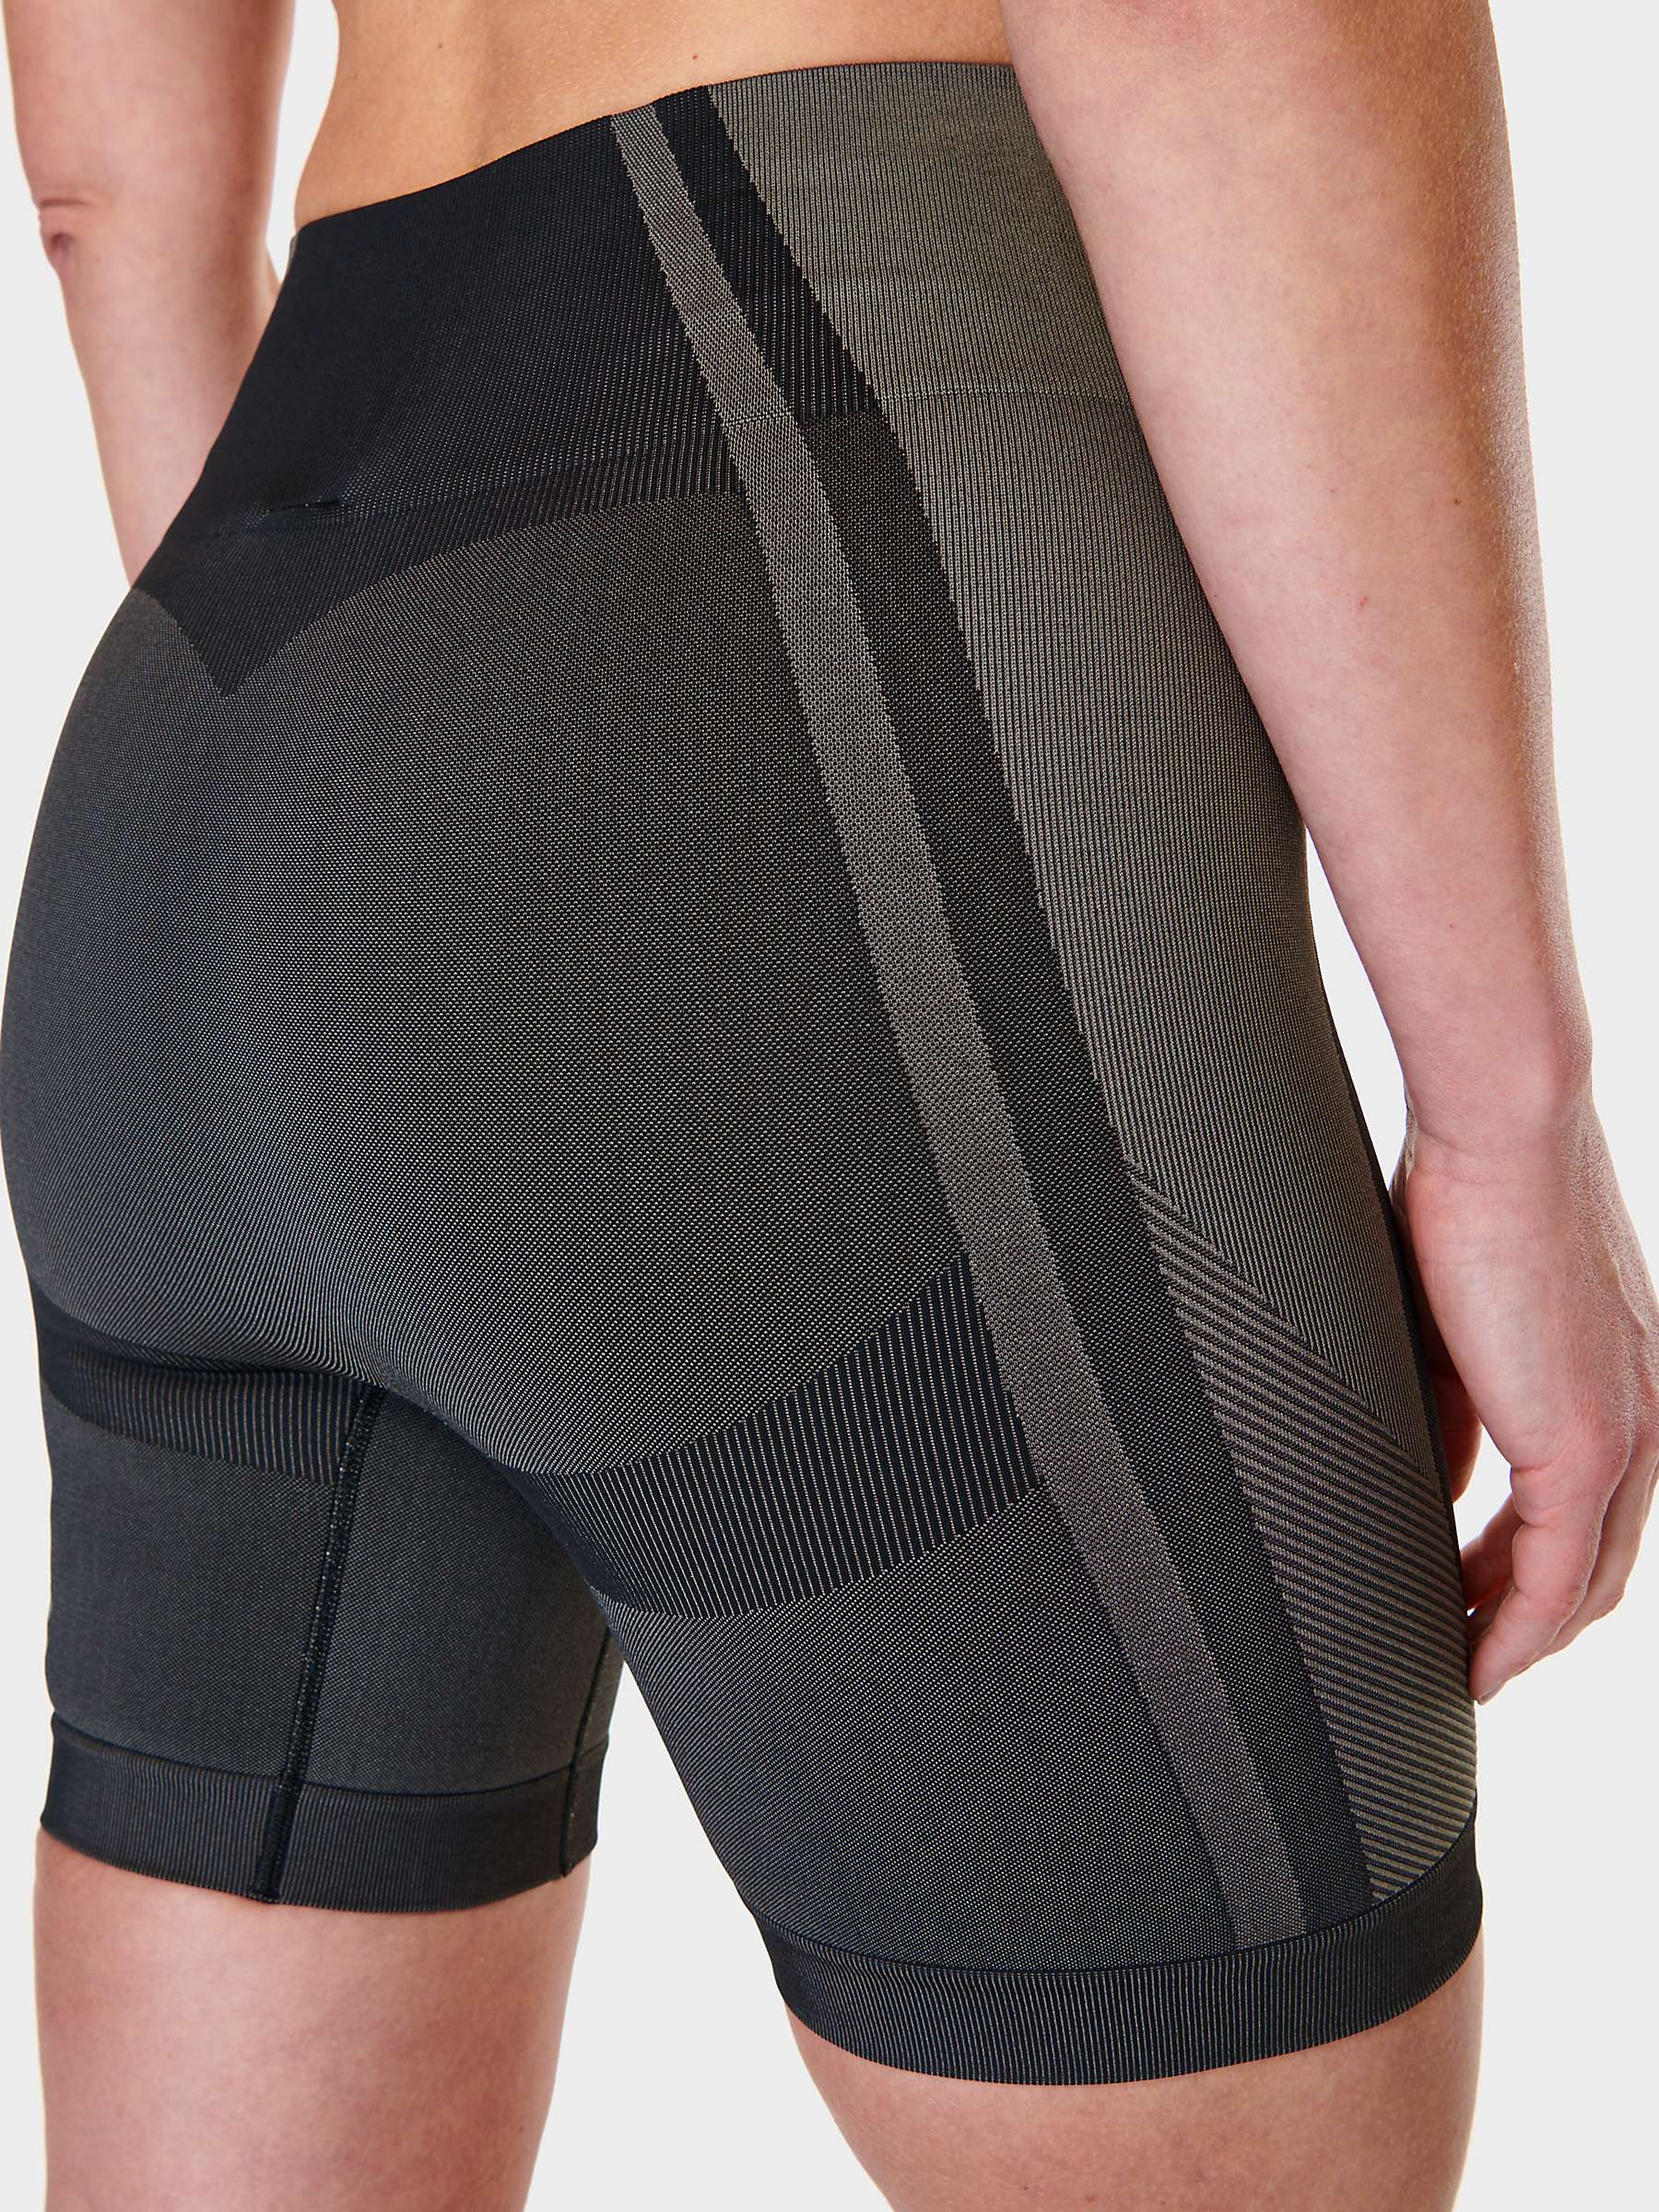 Buy Sweaty Betty Silhouette Sculpt Seamless Workout Shorts Online at johnlewis.com